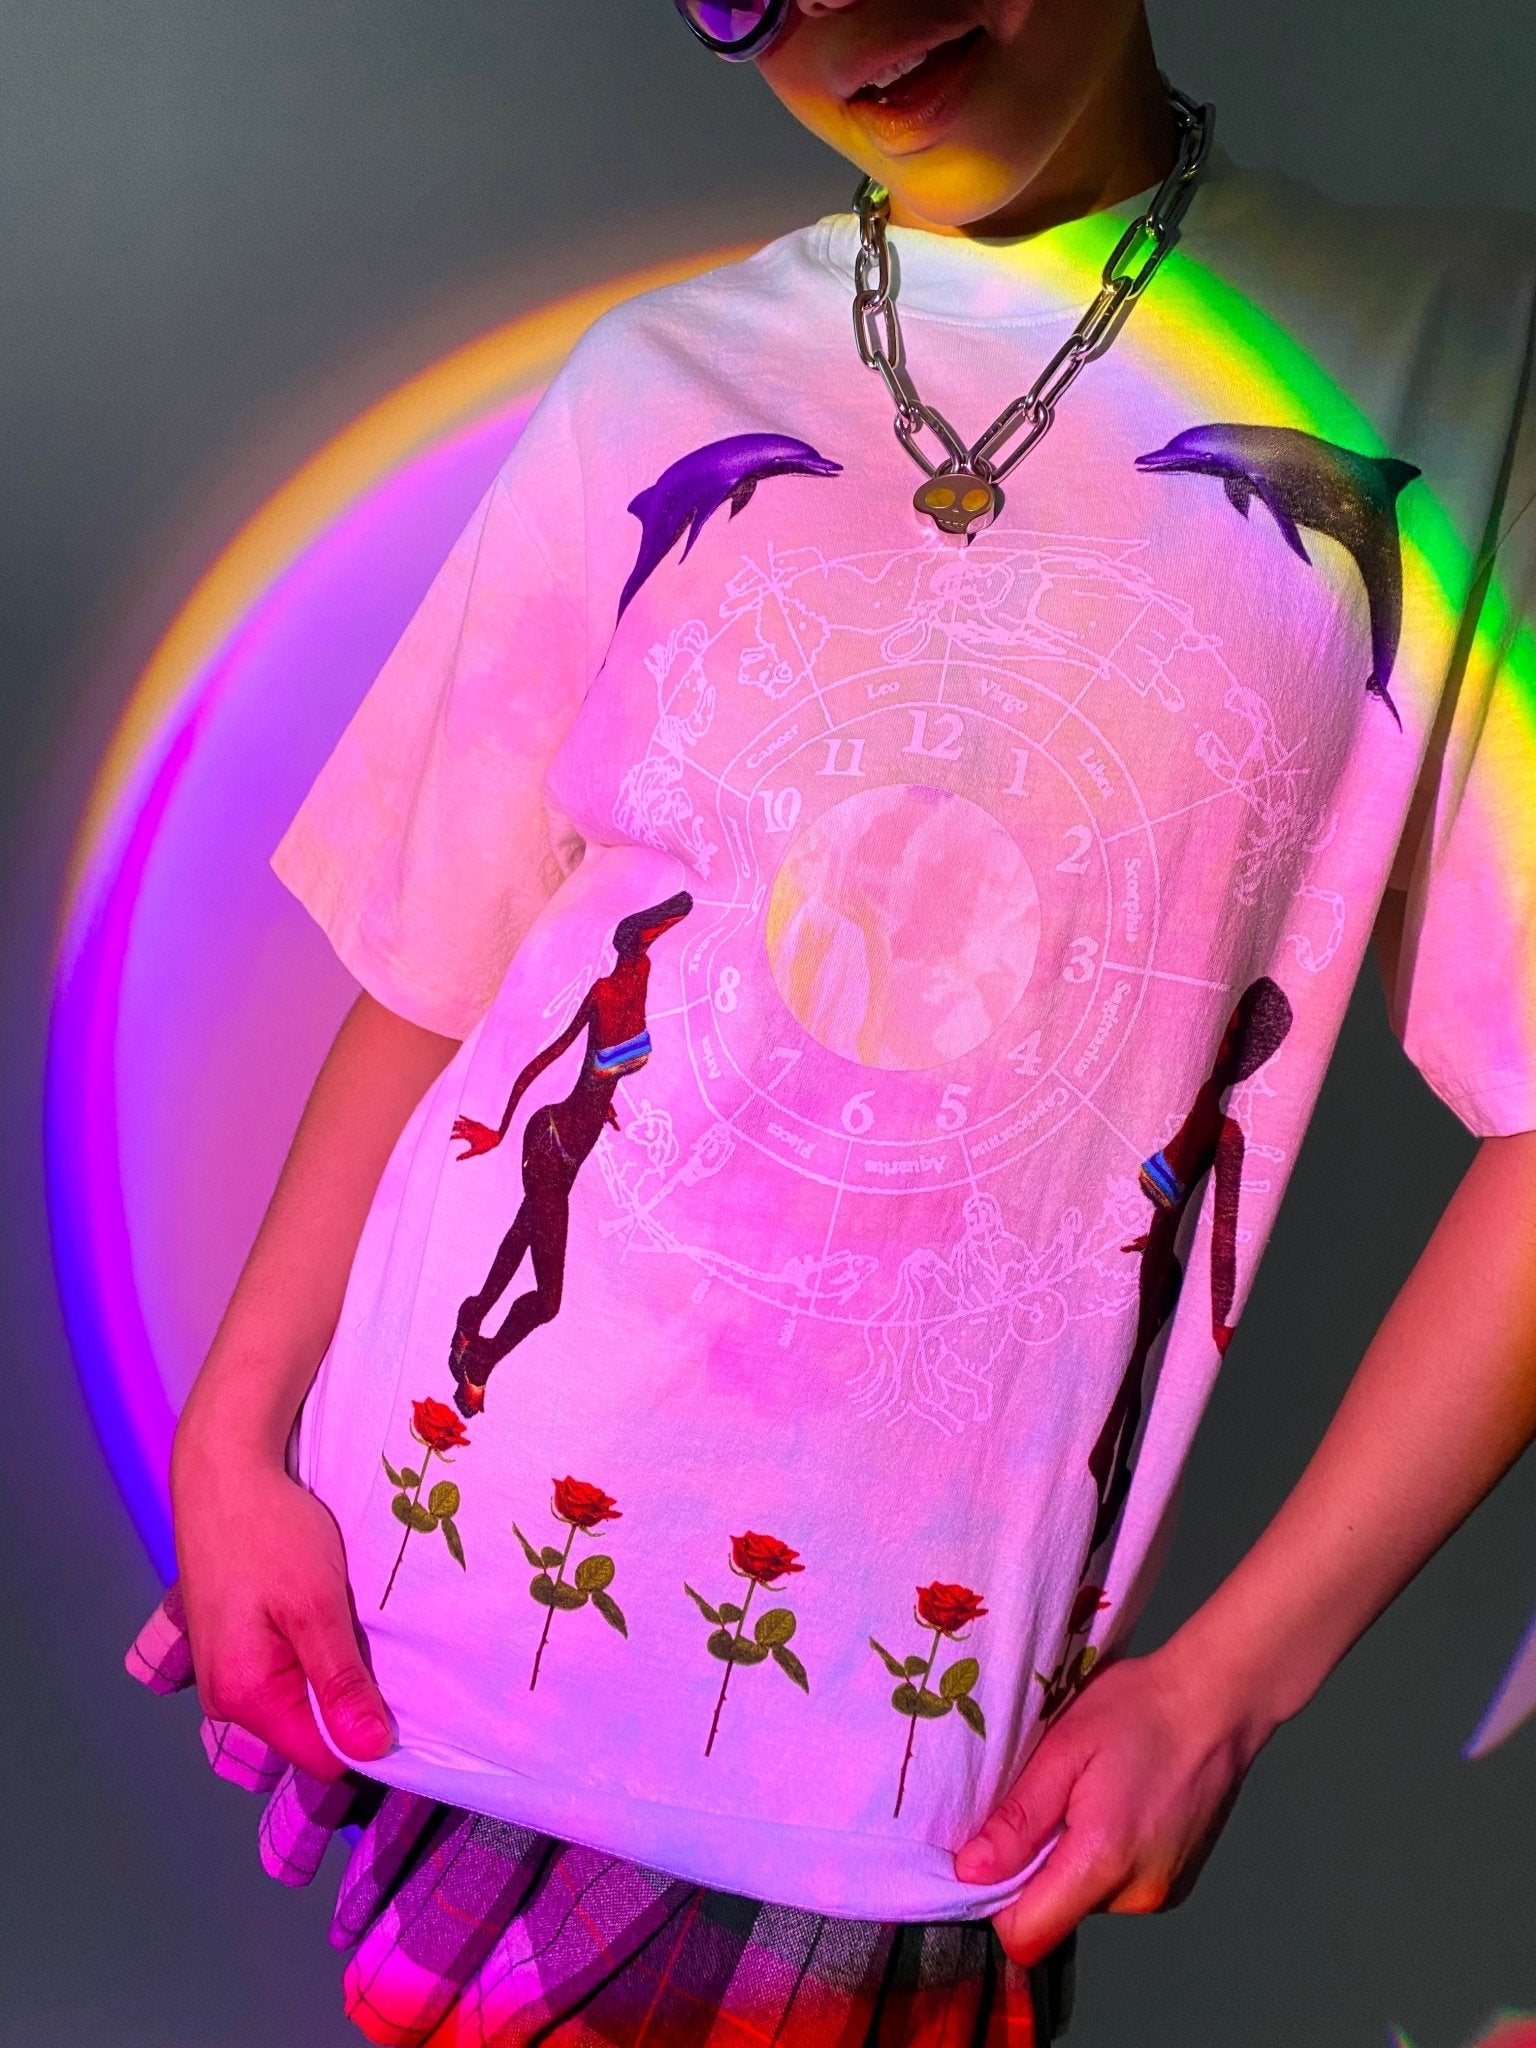 ESPRIT 空想 - Summer Night T-Shirt - 100% Electronica Official Store (Photo 4)